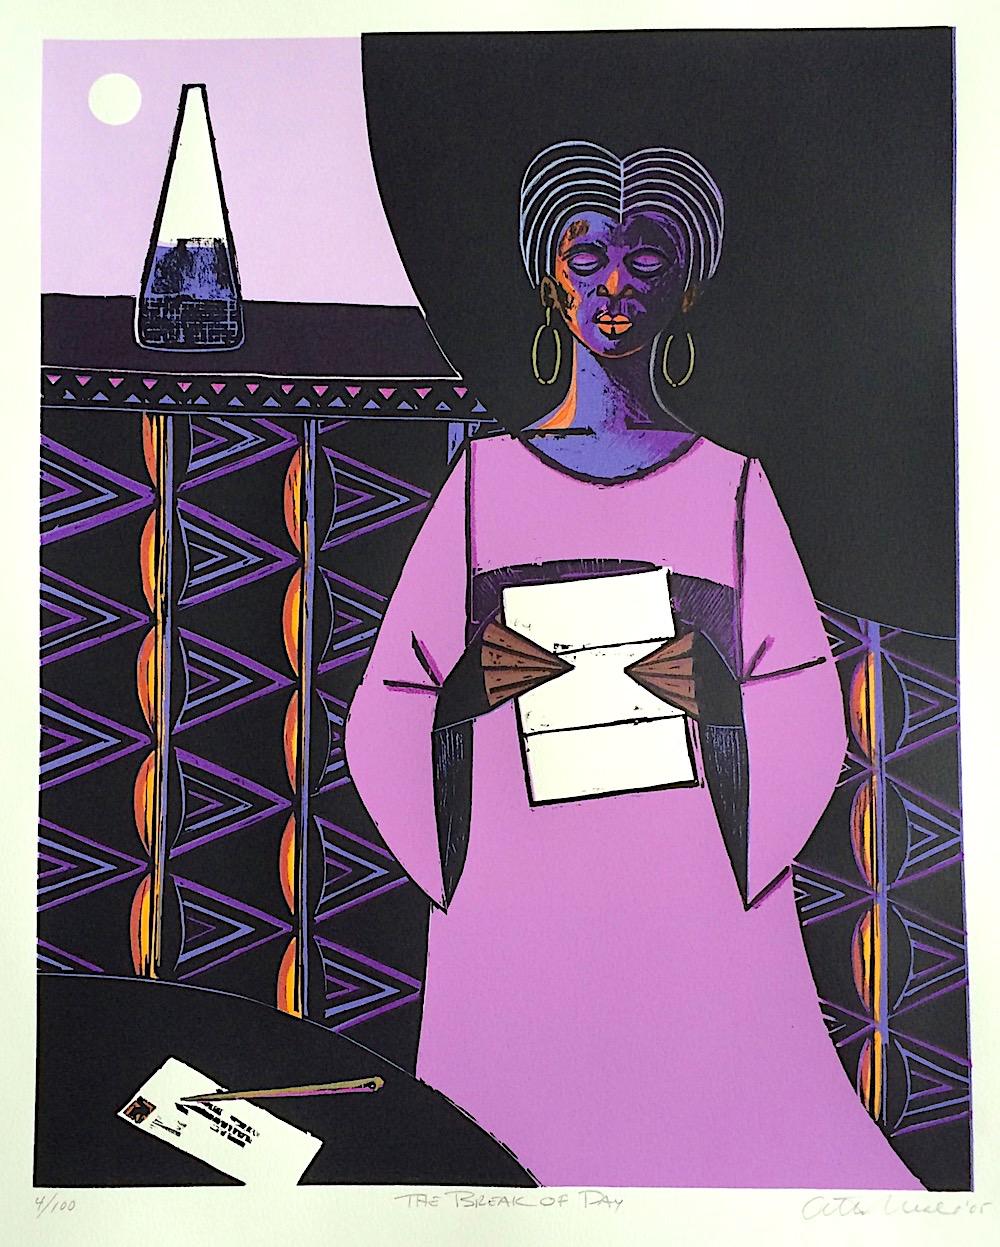 Otto Neals Portrait Print - THE BREAK OF DAY Signed Woodcut, Black Woman Reading Letter, Lavender Dress